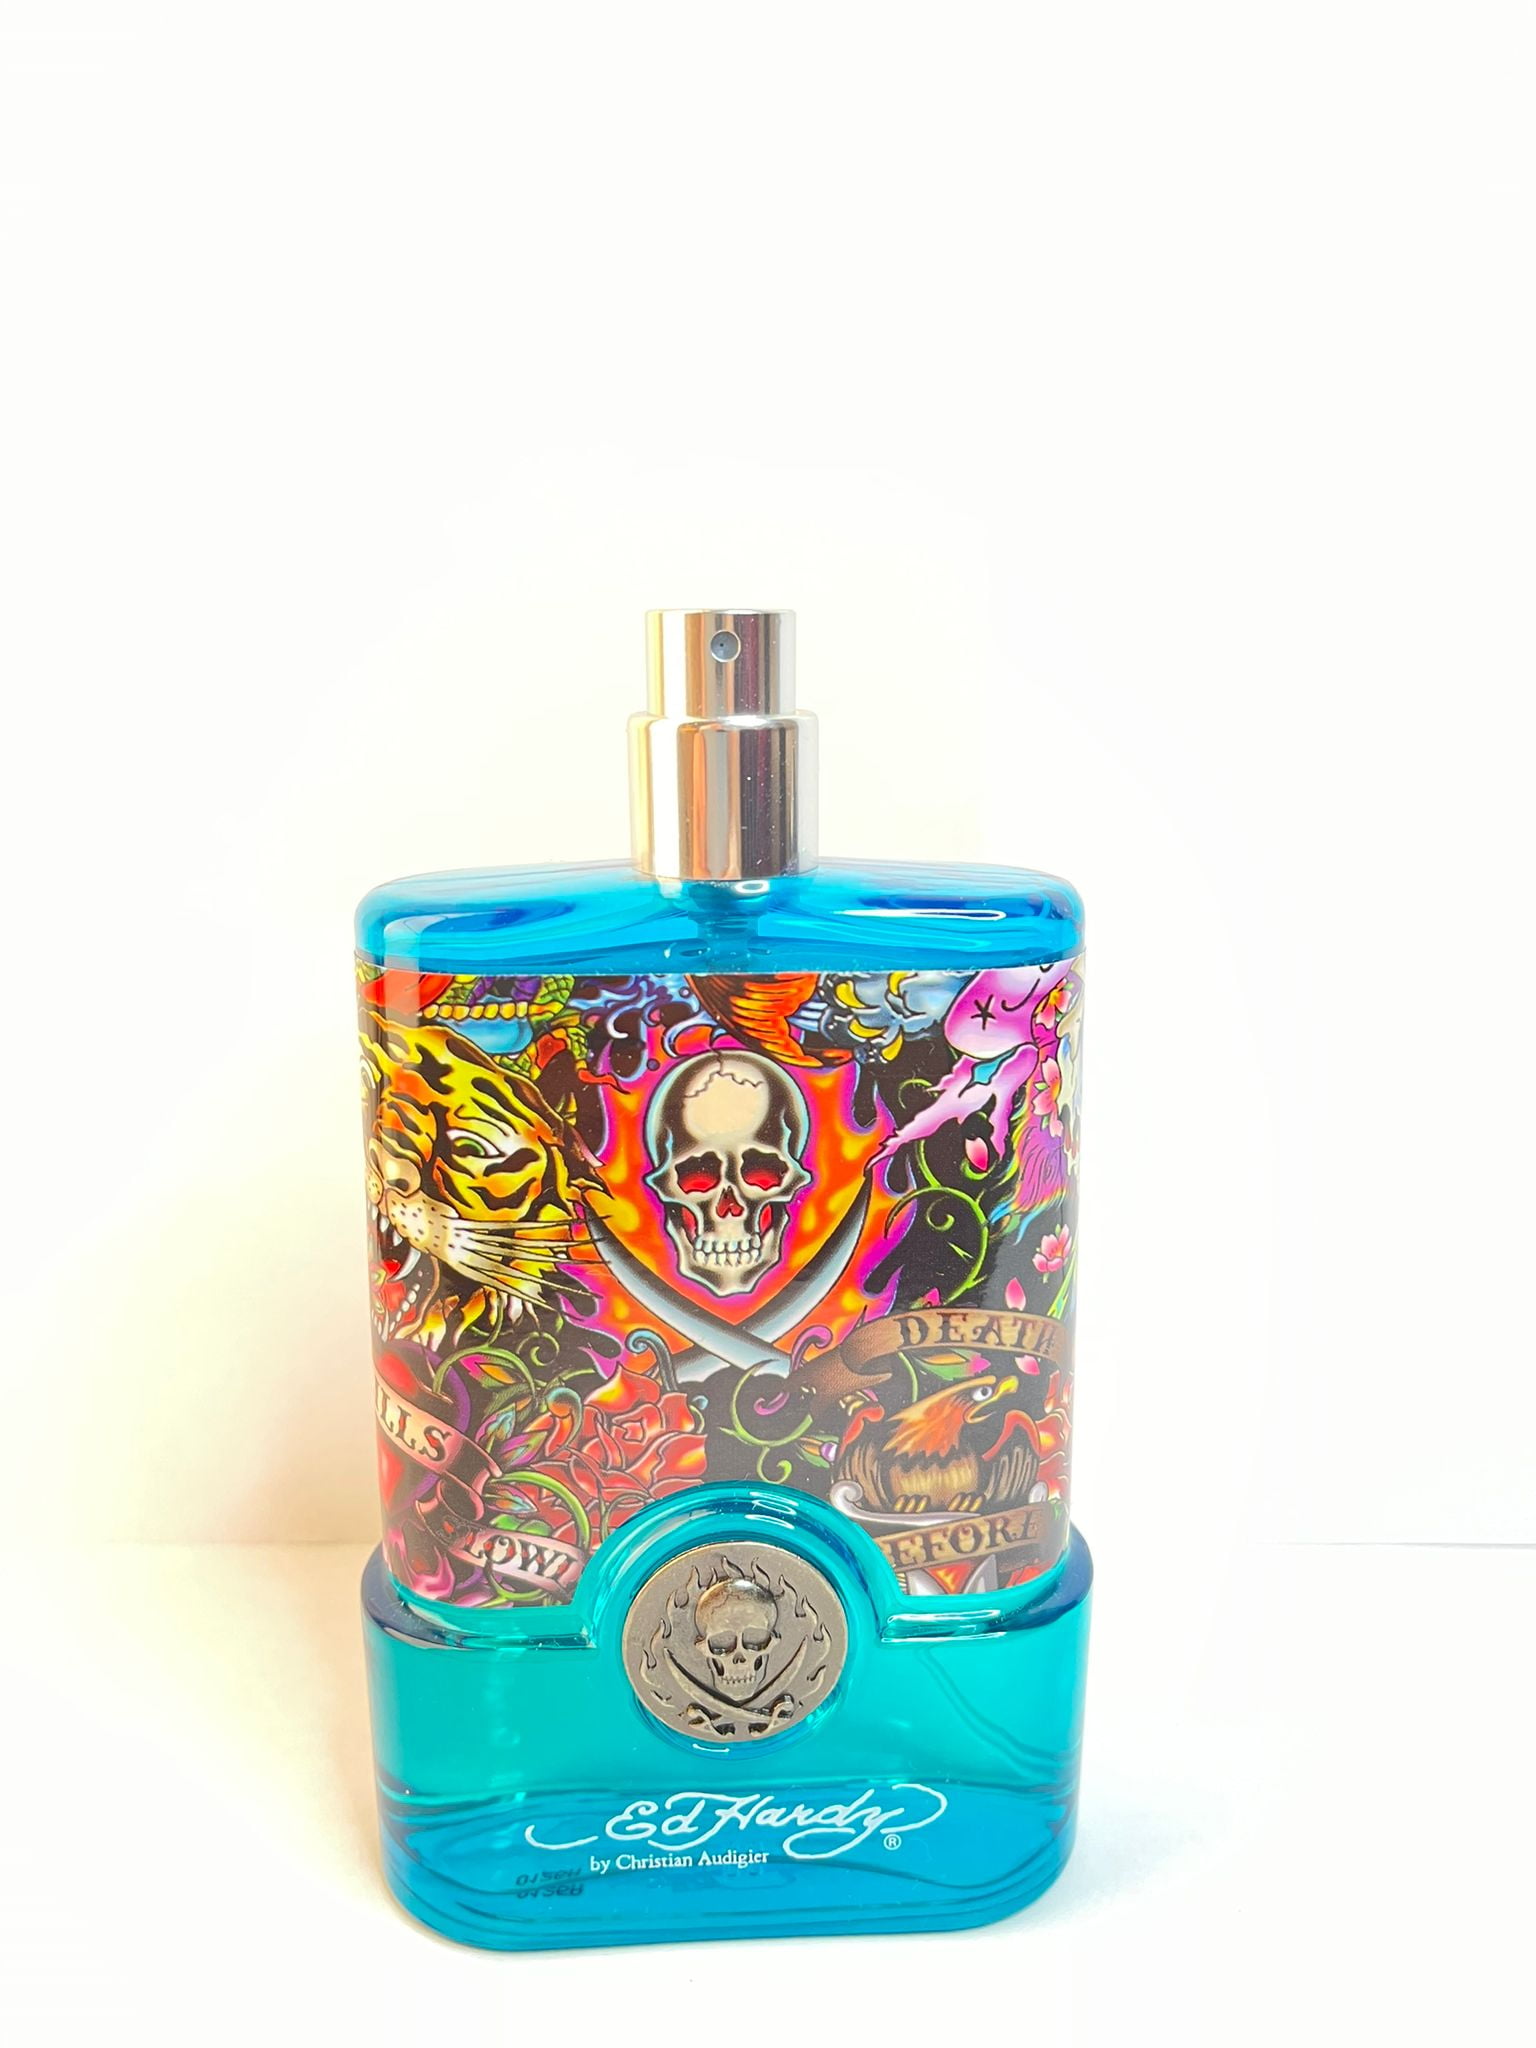 Ed Hardy Hearts & Daggers For Men EDT Cologne Spray 3.4oz/100ml NEW ...